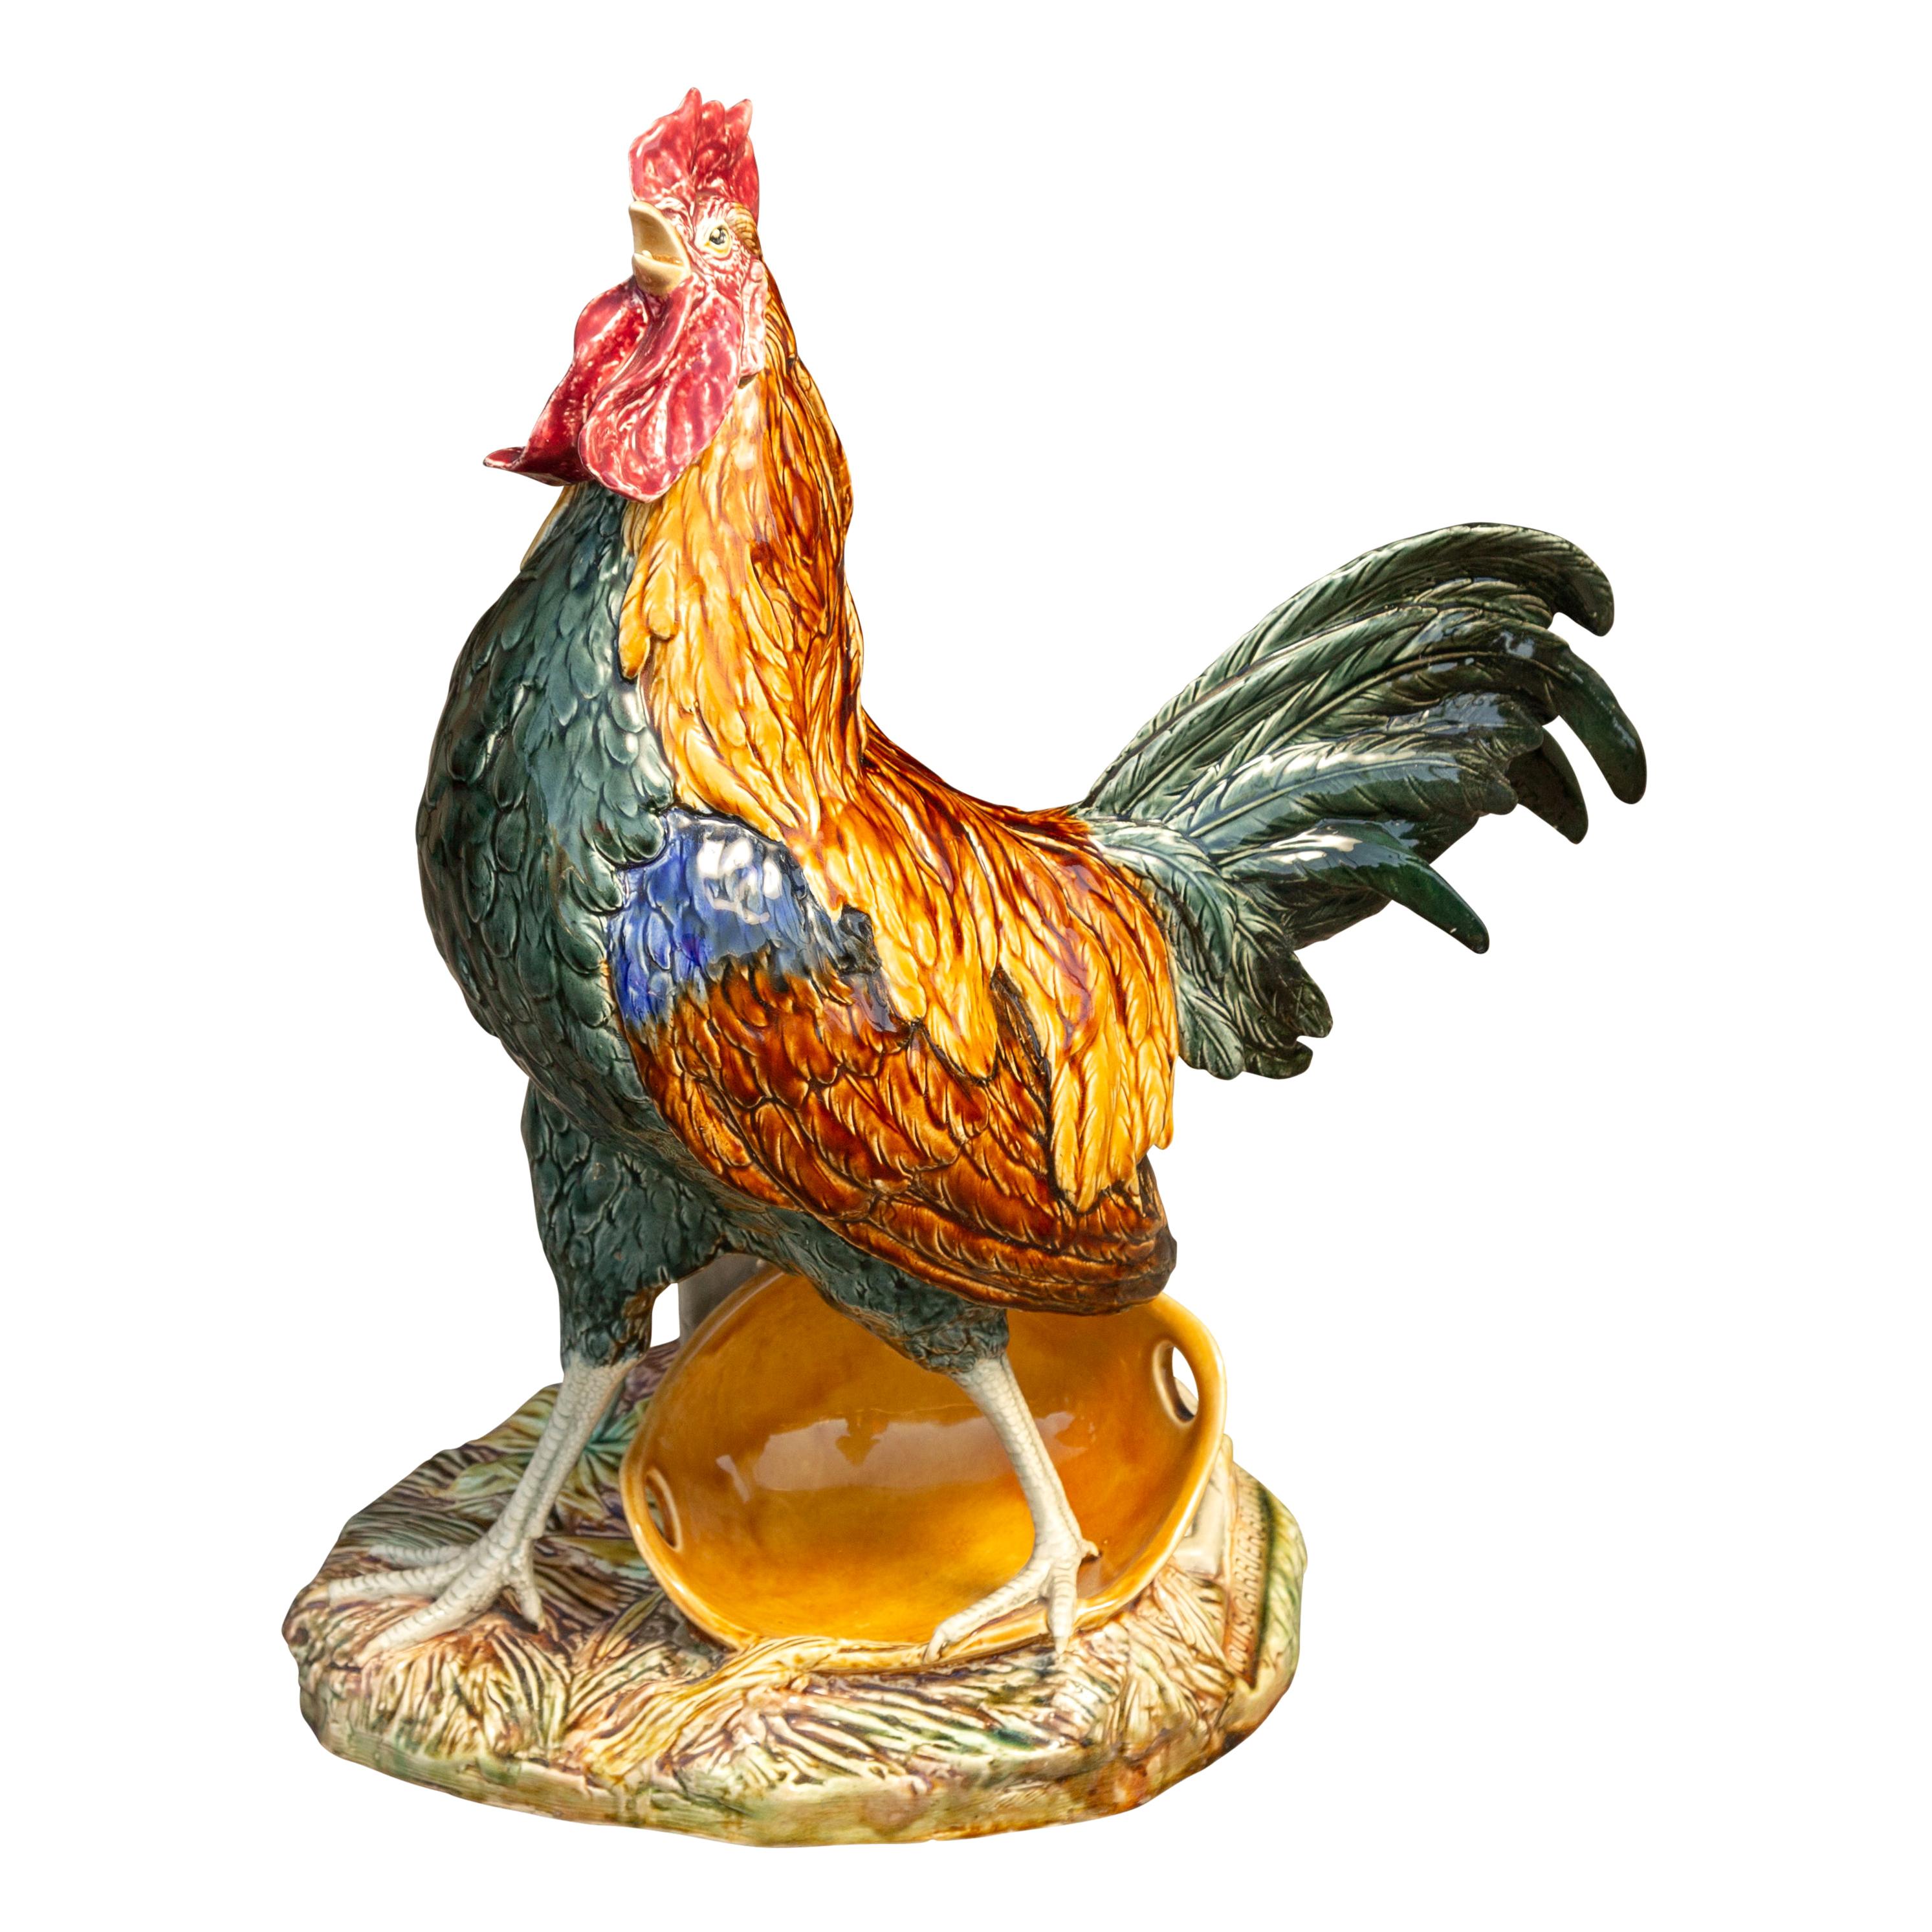 French 1880s Choisy-le-Roi Majolica Rooster Signed Louis-Robert Carrier-Belleuse